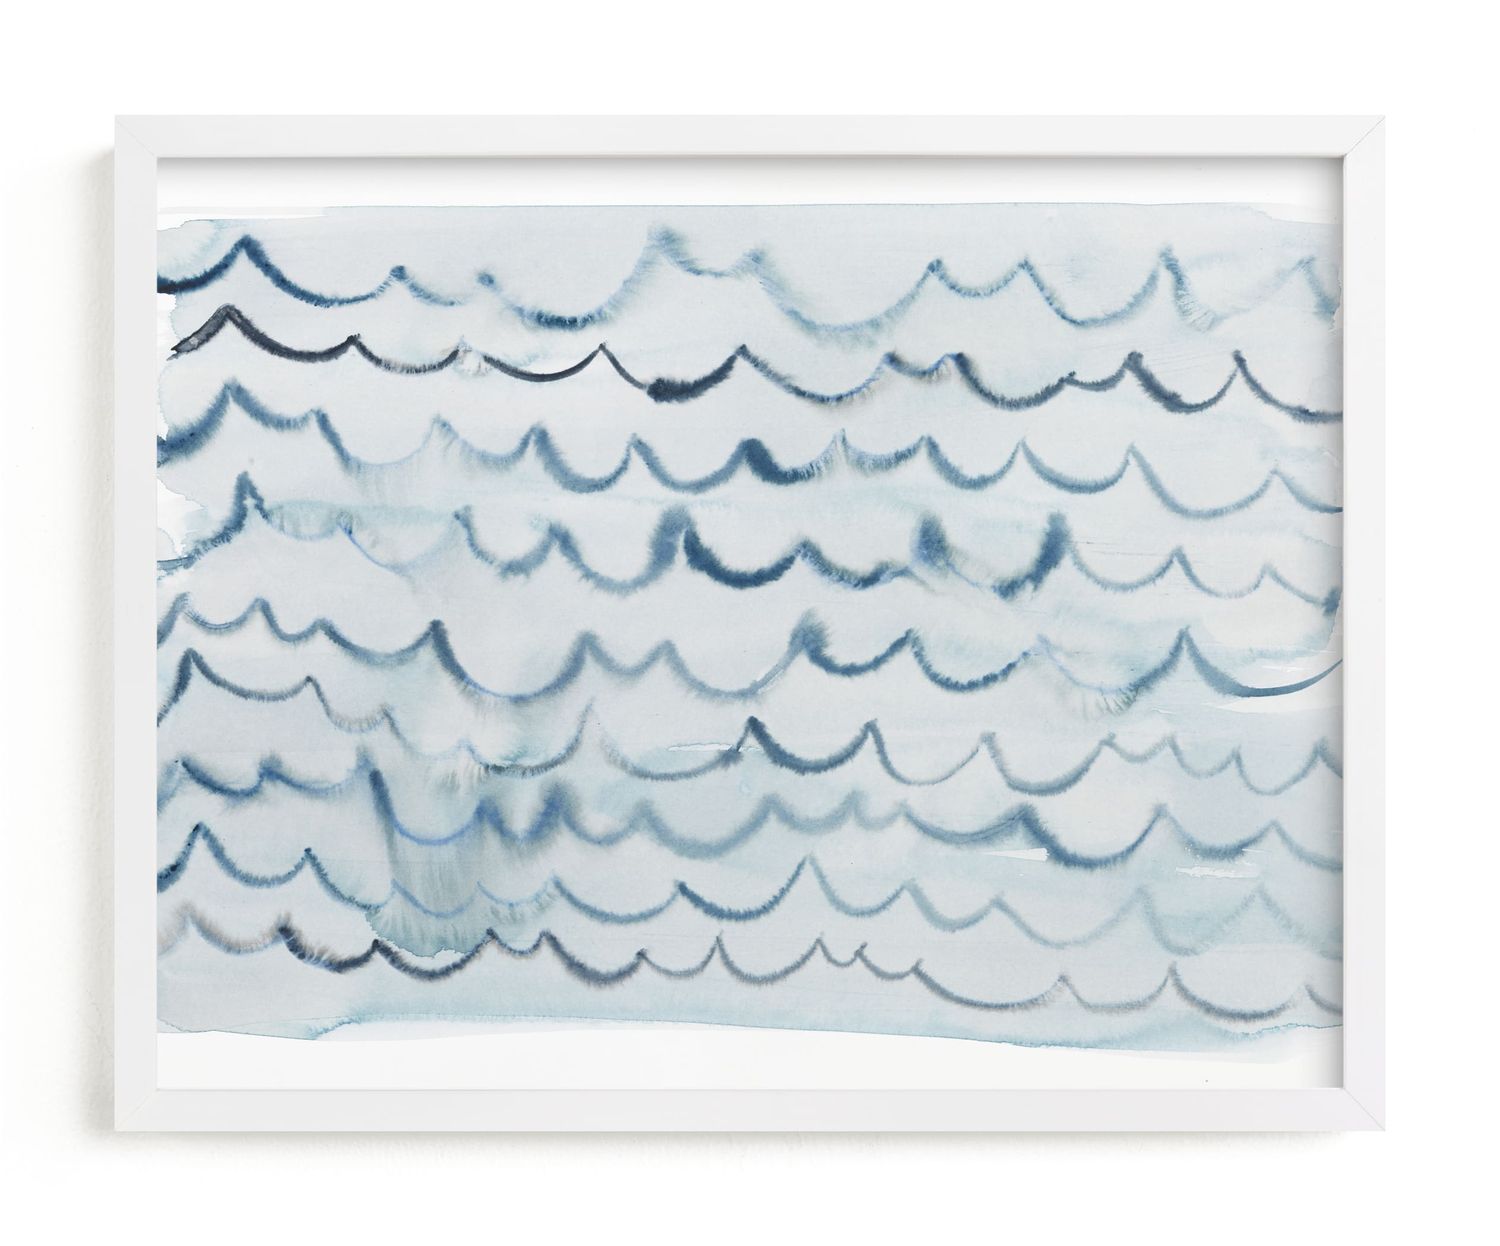 Shop Waves (11x14), Gilded Wood Frame from Minted on Openhaus